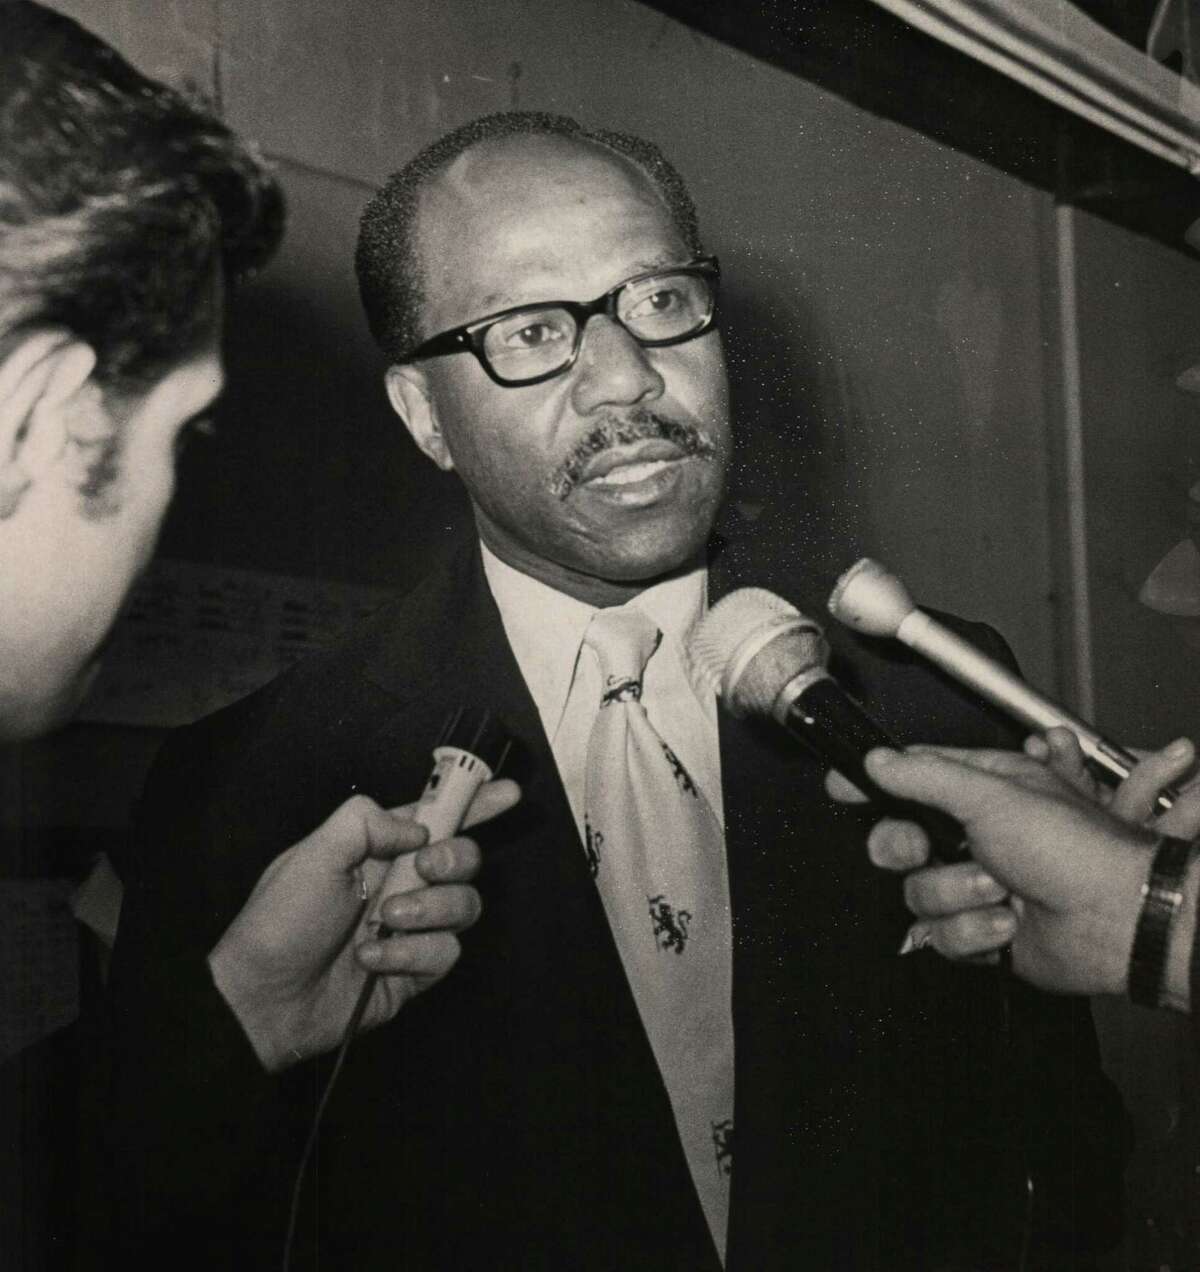 Henry "Hank" Parker, Connecticut state treasurer from 1975 to 1986 and New Haven Haven mayoral candidate in 1979.